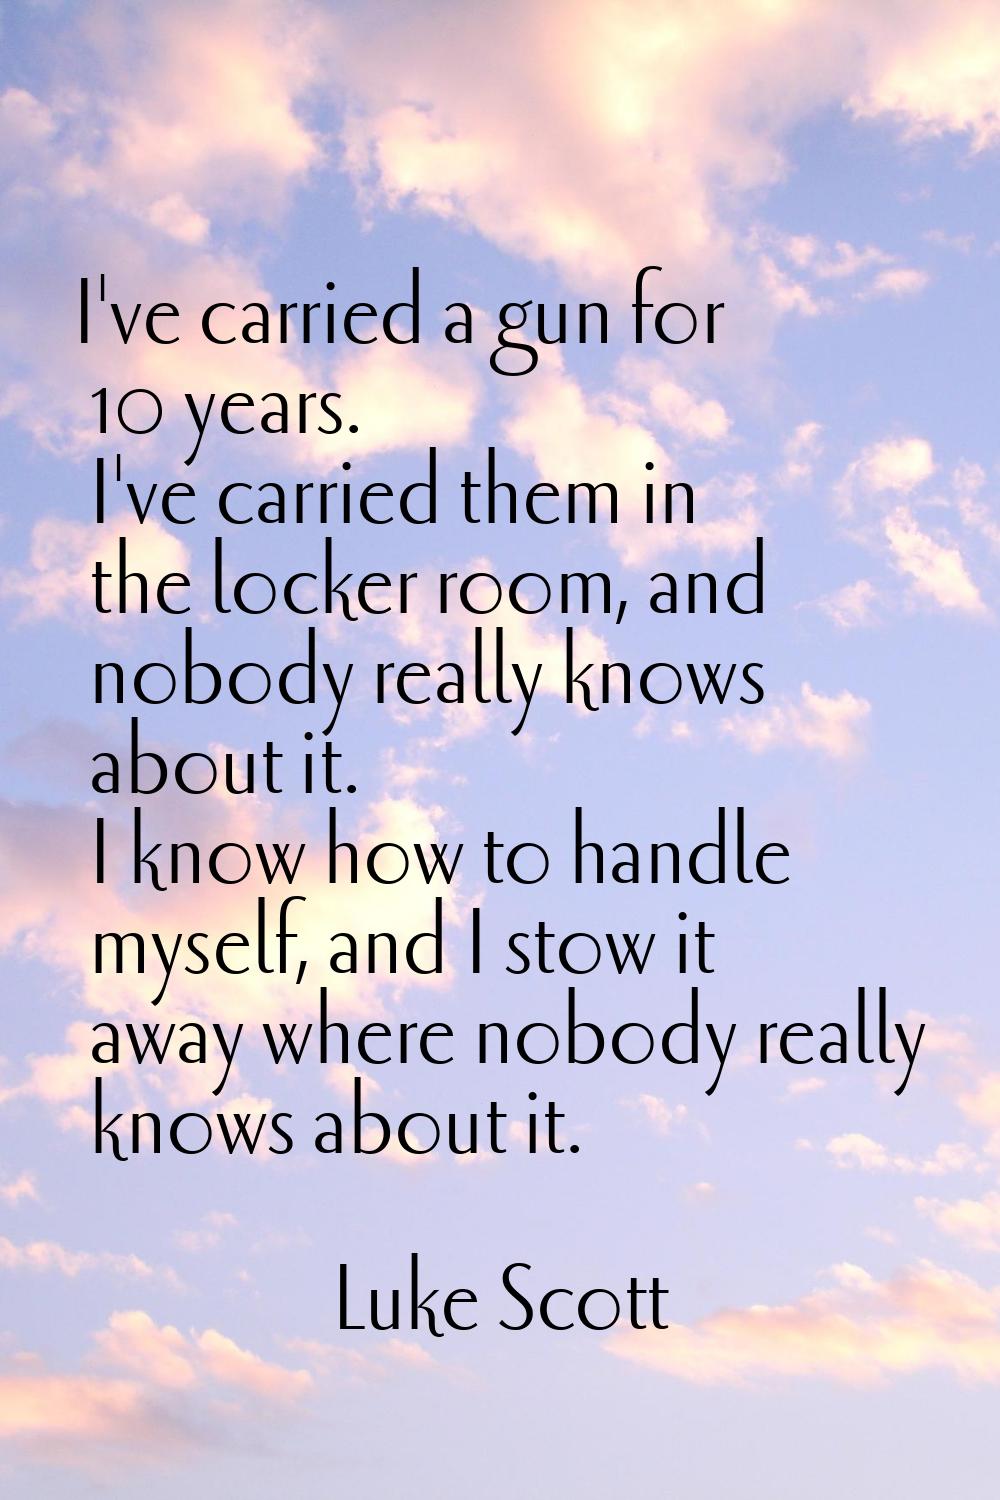 I've carried a gun for 10 years. I've carried them in the locker room, and nobody really knows abou